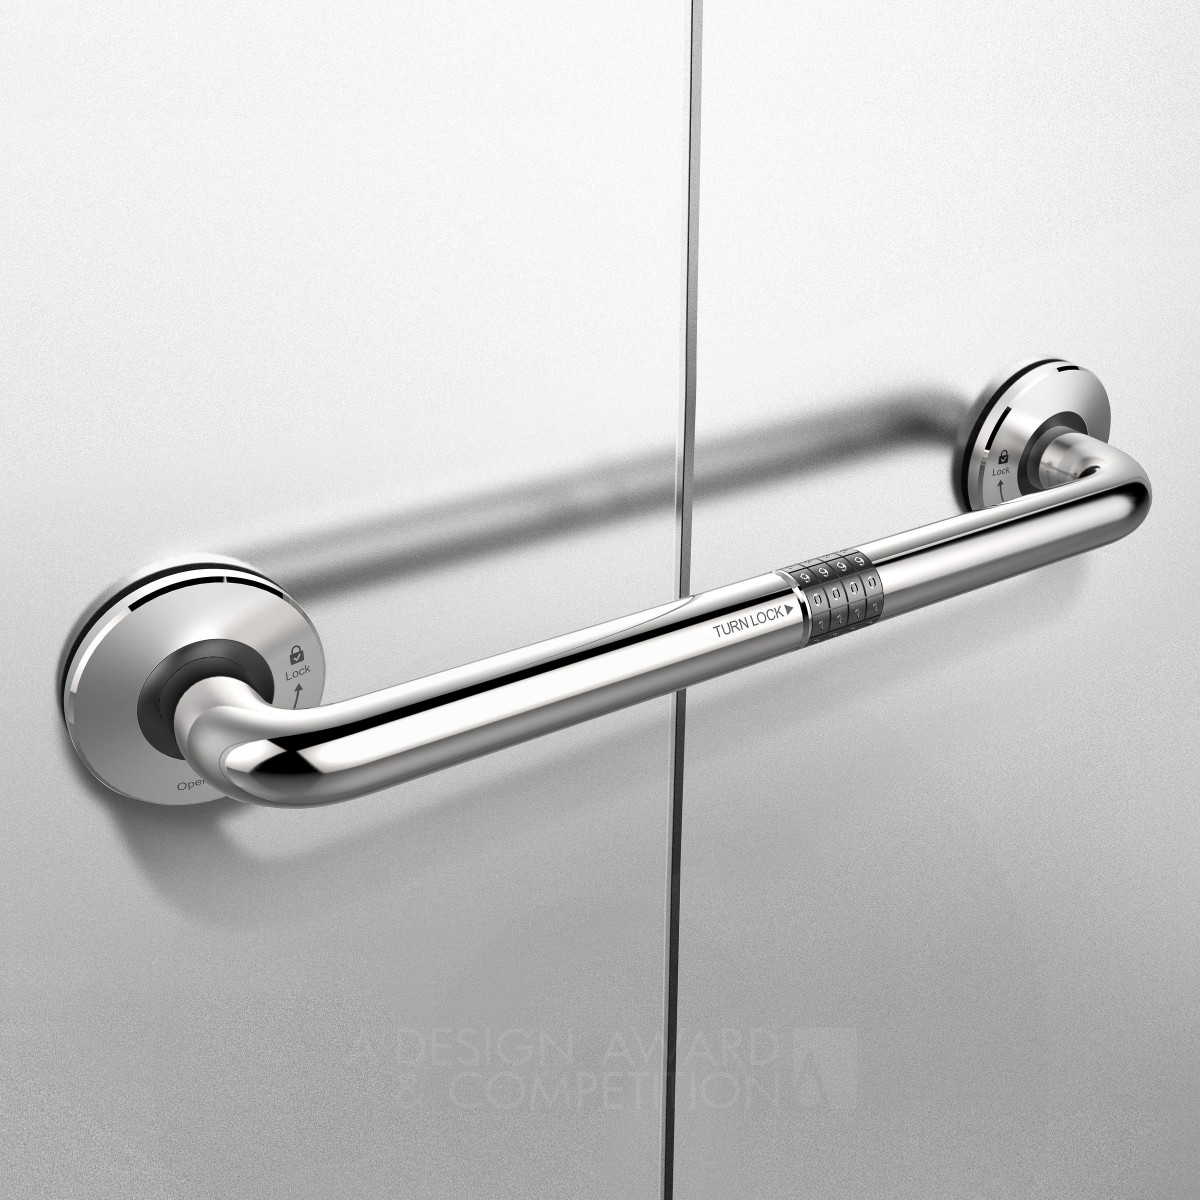 Turn-Lock Combined door handle and coded lock by inDare Design